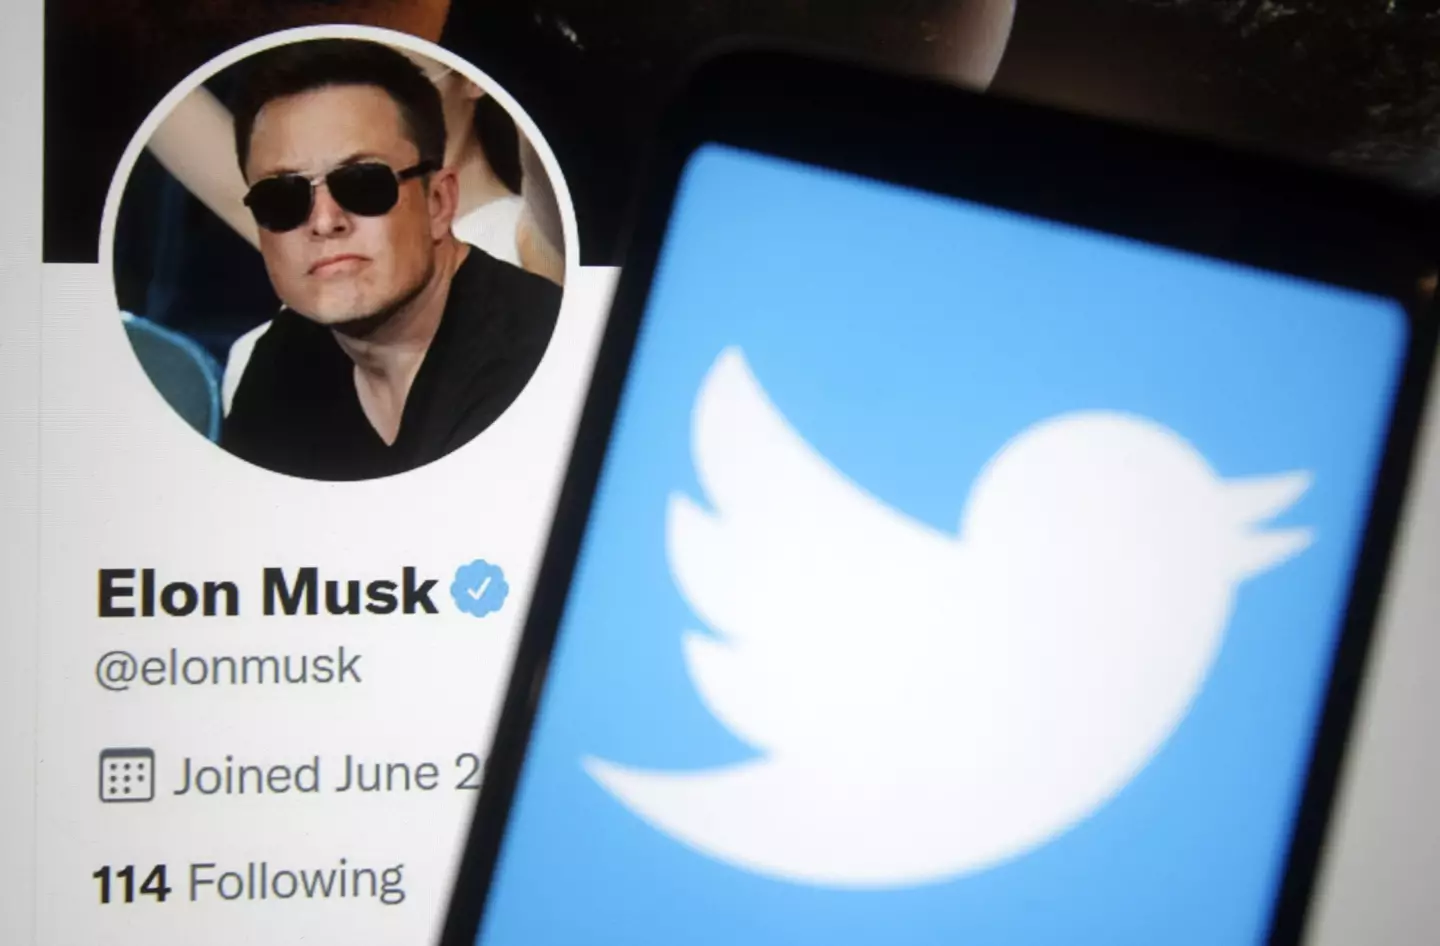 A number of celebrities are ditching the platform after Musk's takeover.